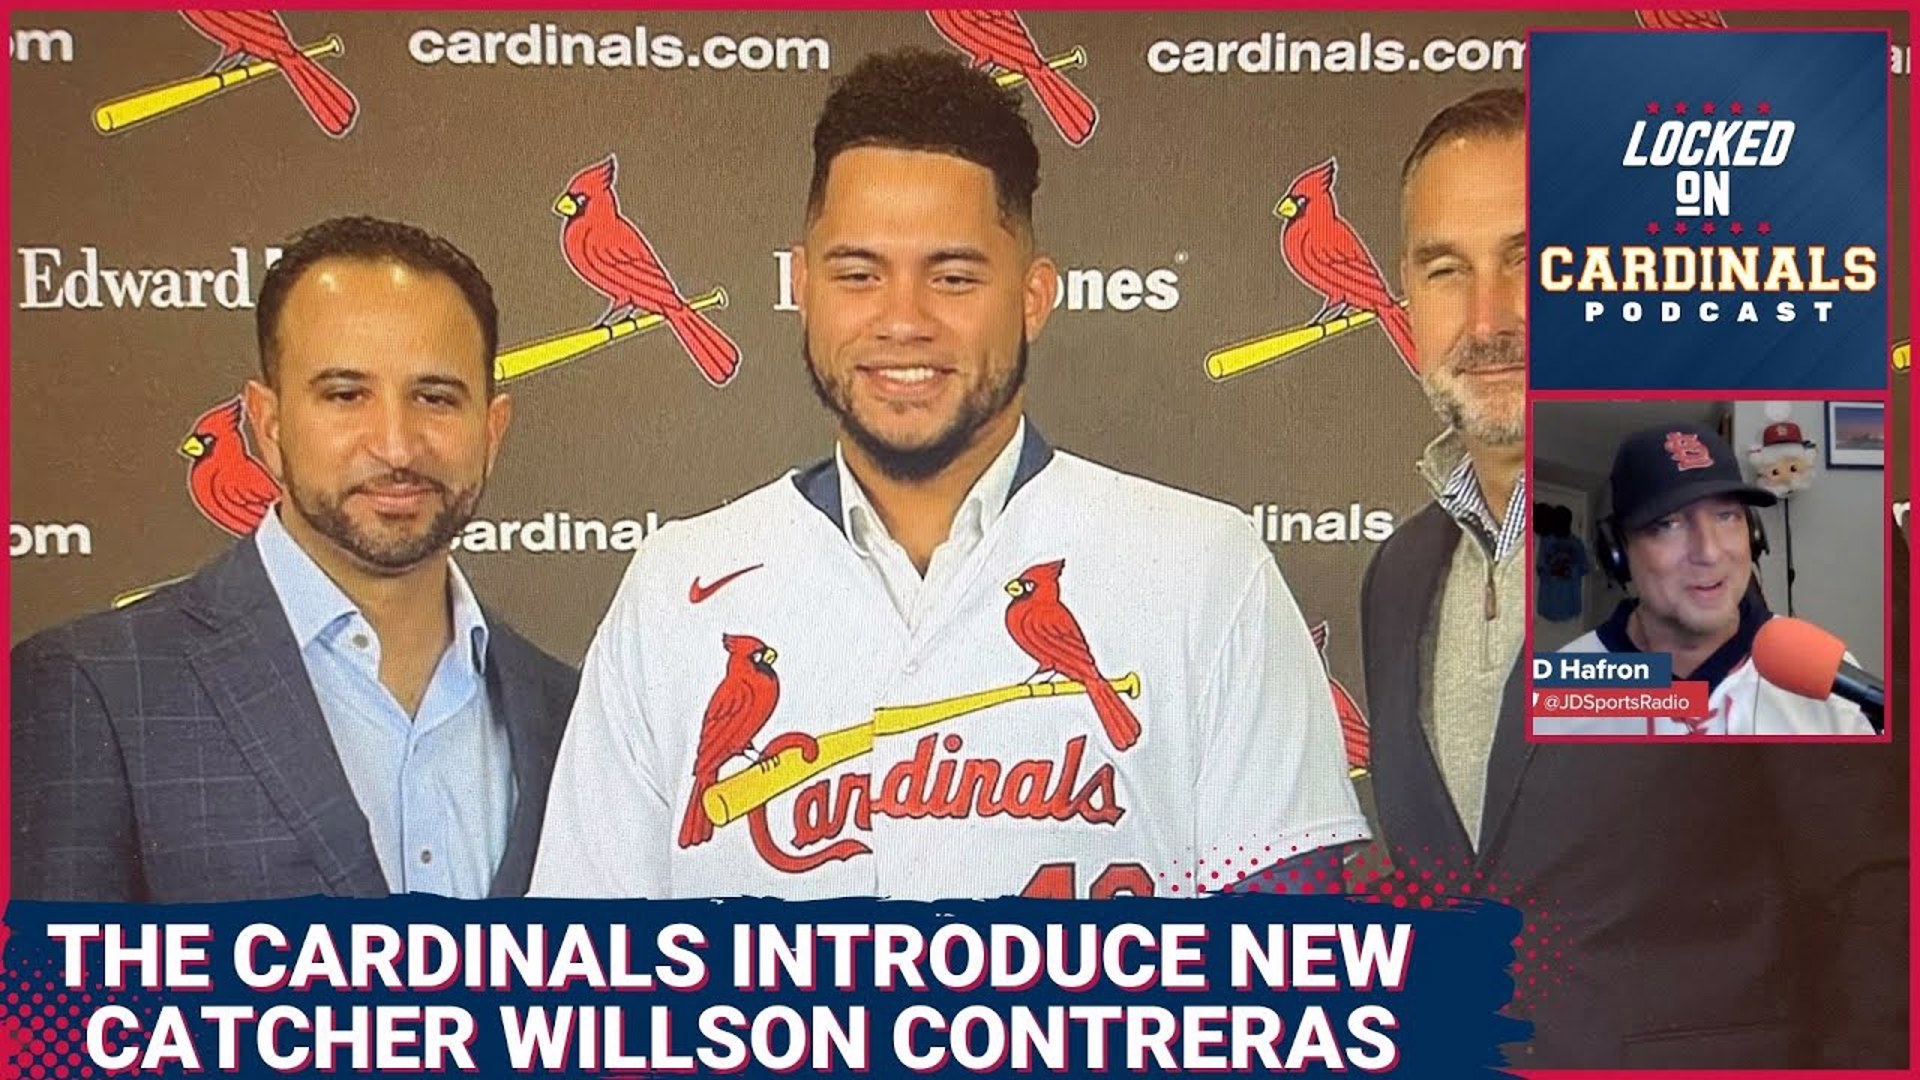 New St. Louis Cardinals catcher Willson Contreras was introduced. Once again he impresses with how much becoming a Cardinal means to him.